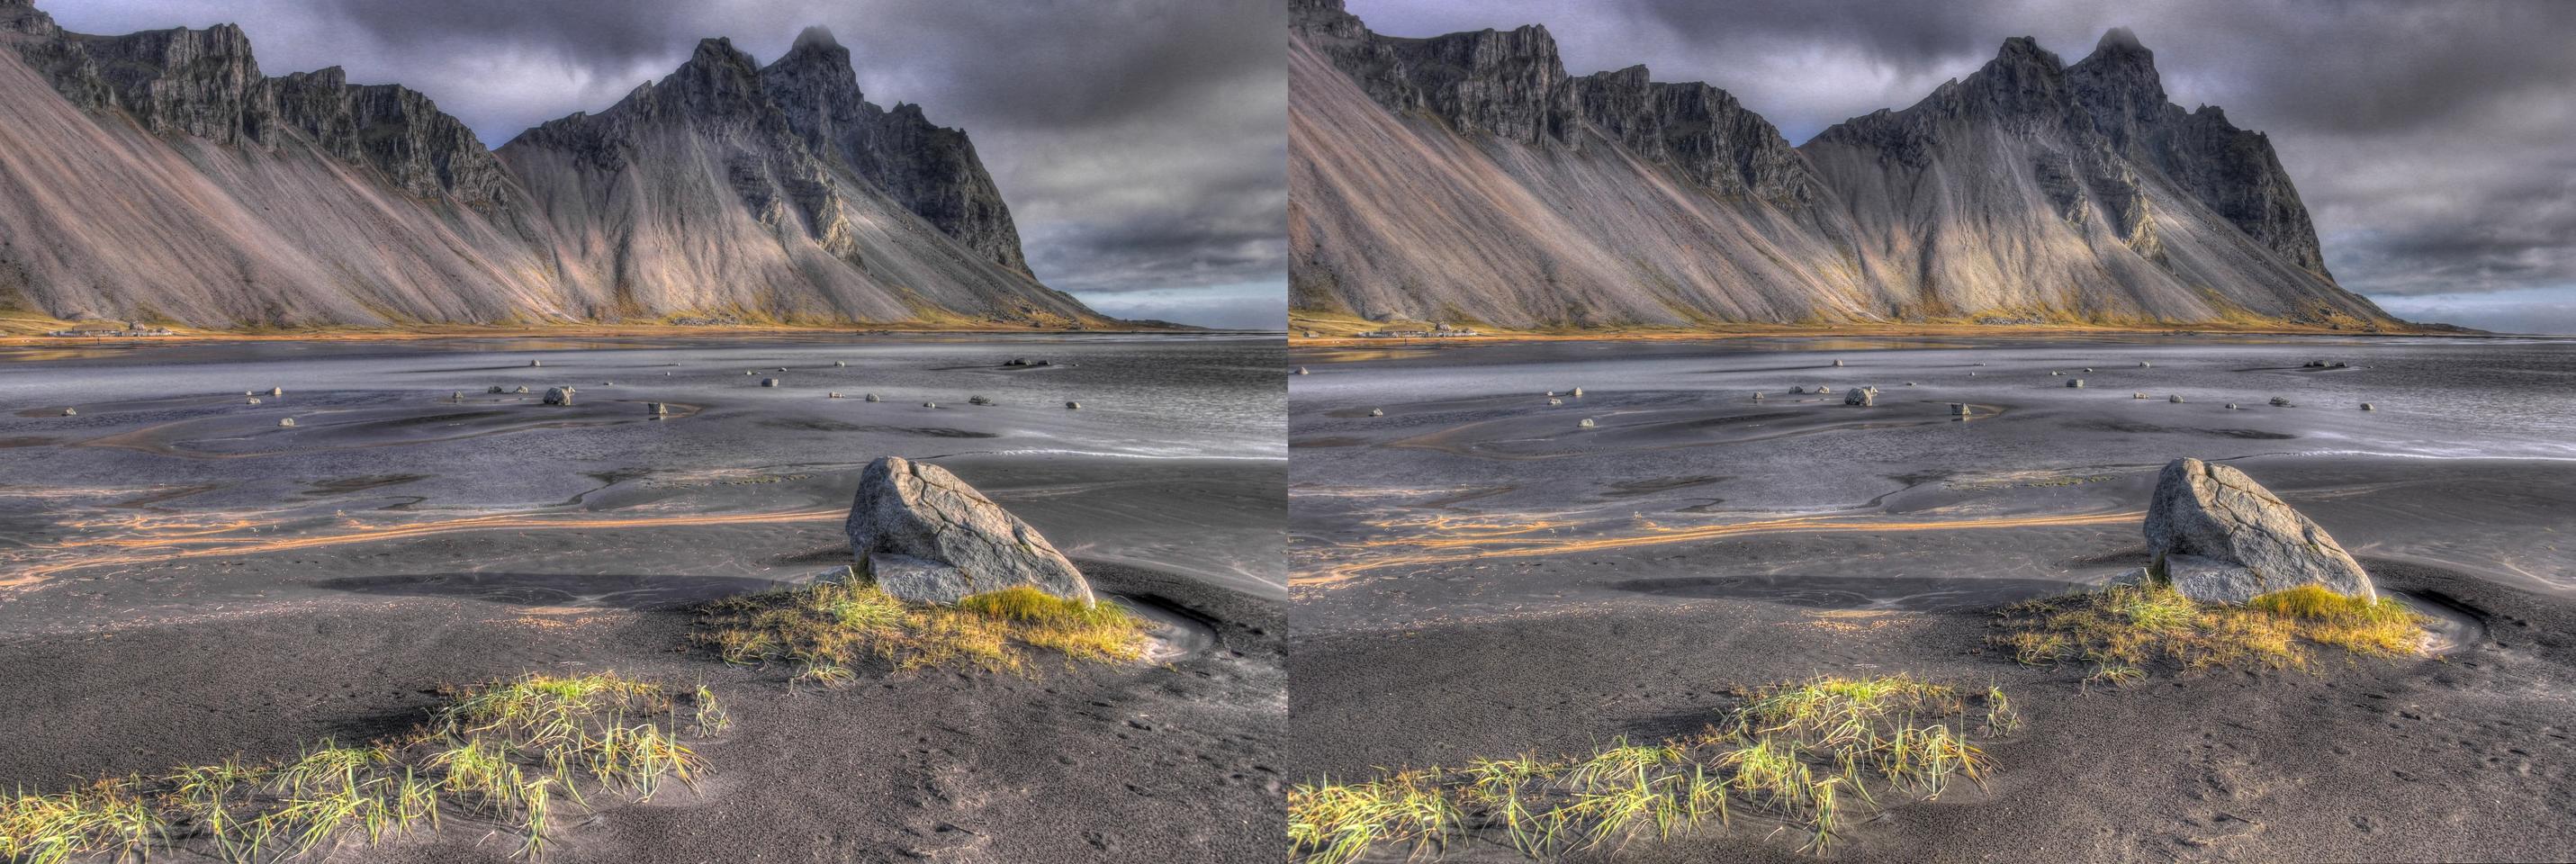 Visit the Beaches of Sunny East Mordor!    (The beach at Stokksnes, Iceland)